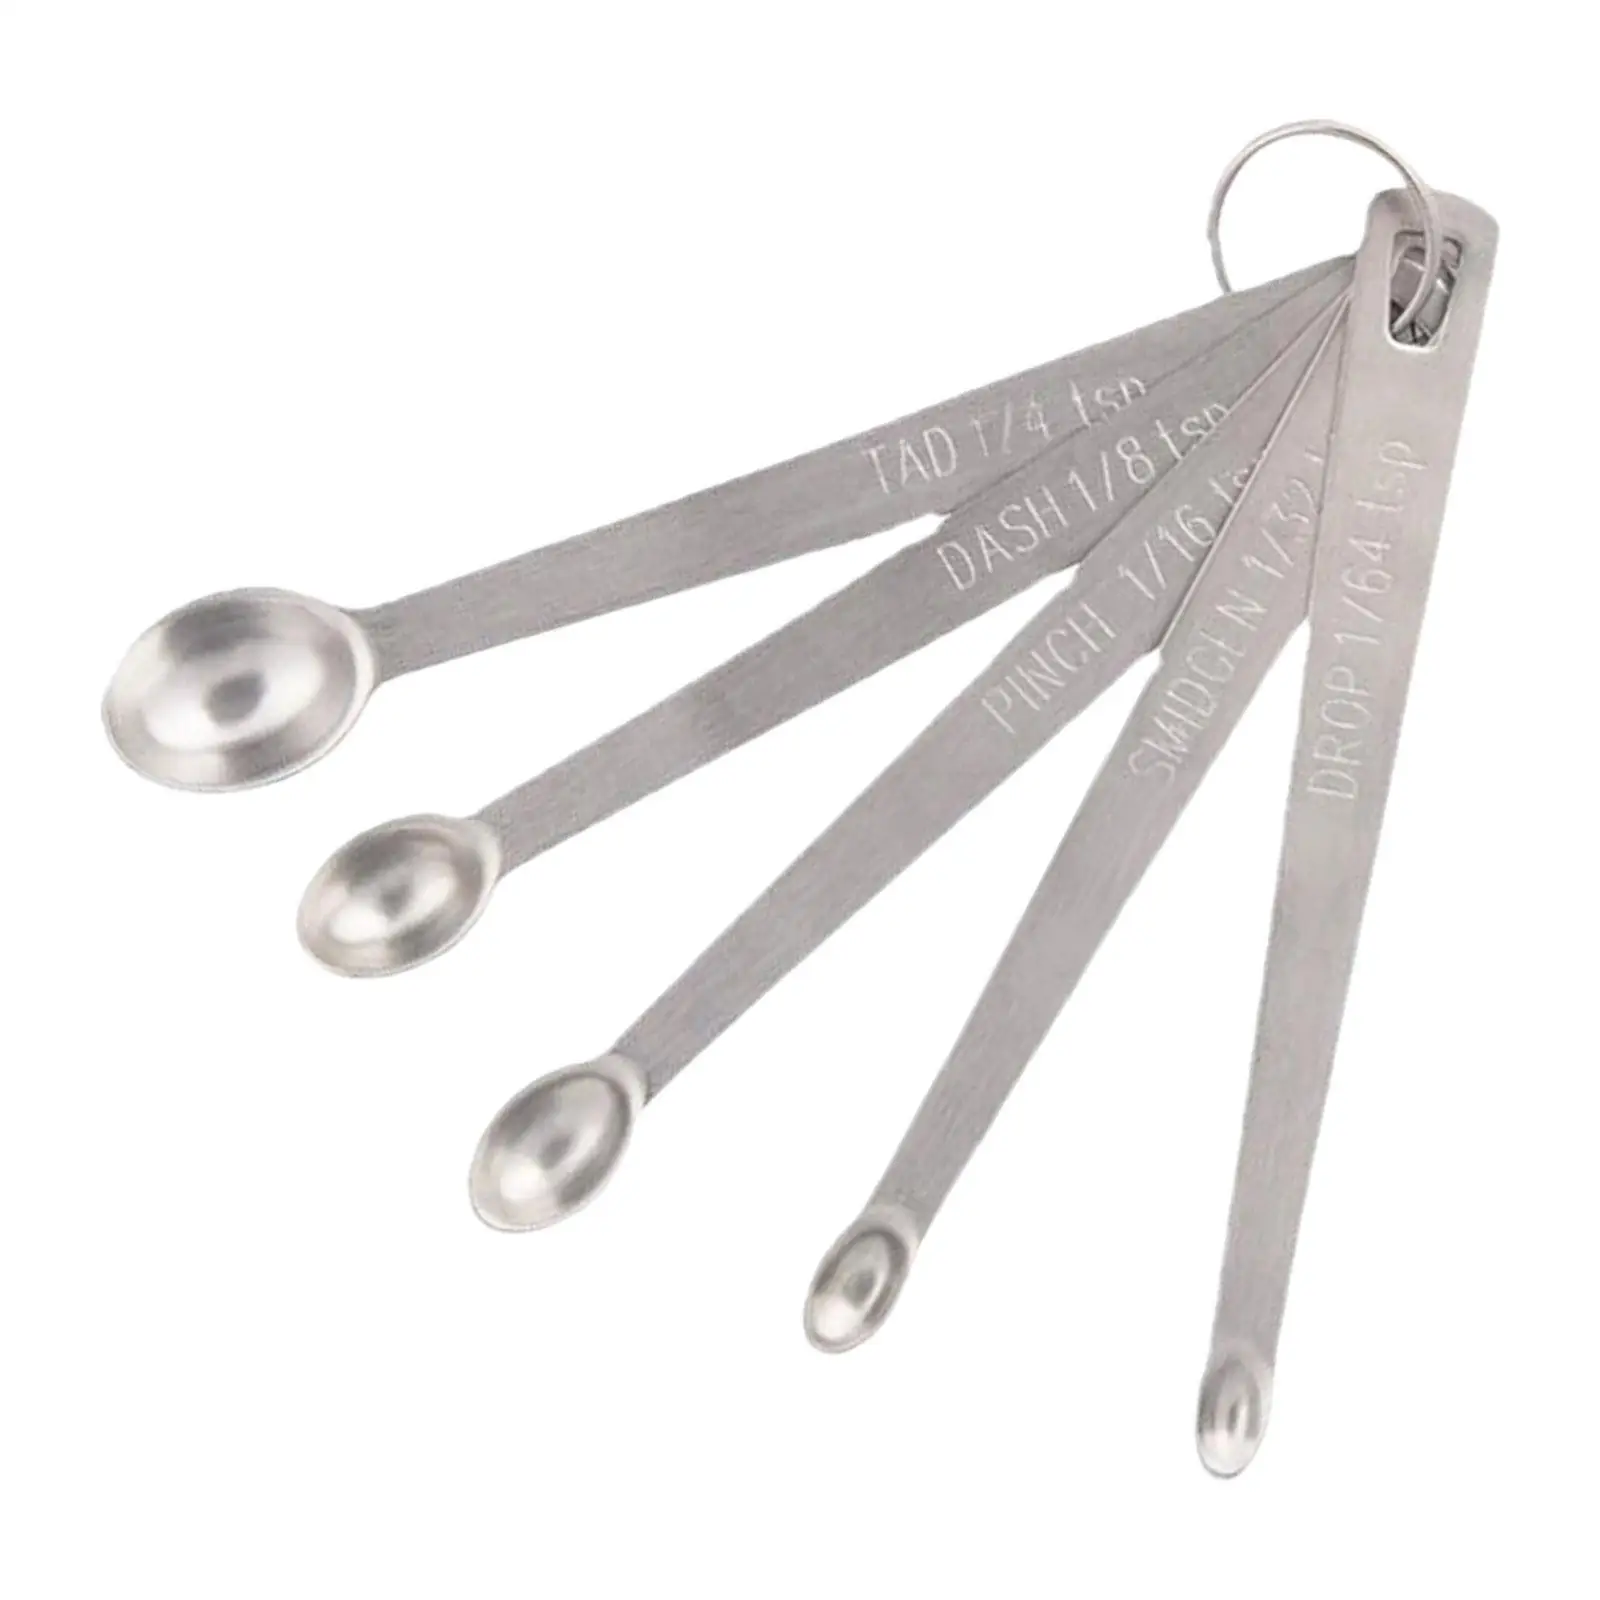 5 Pieces Stainless Steel Small Measuring Spoons, Mini Measuring Spoons Set for